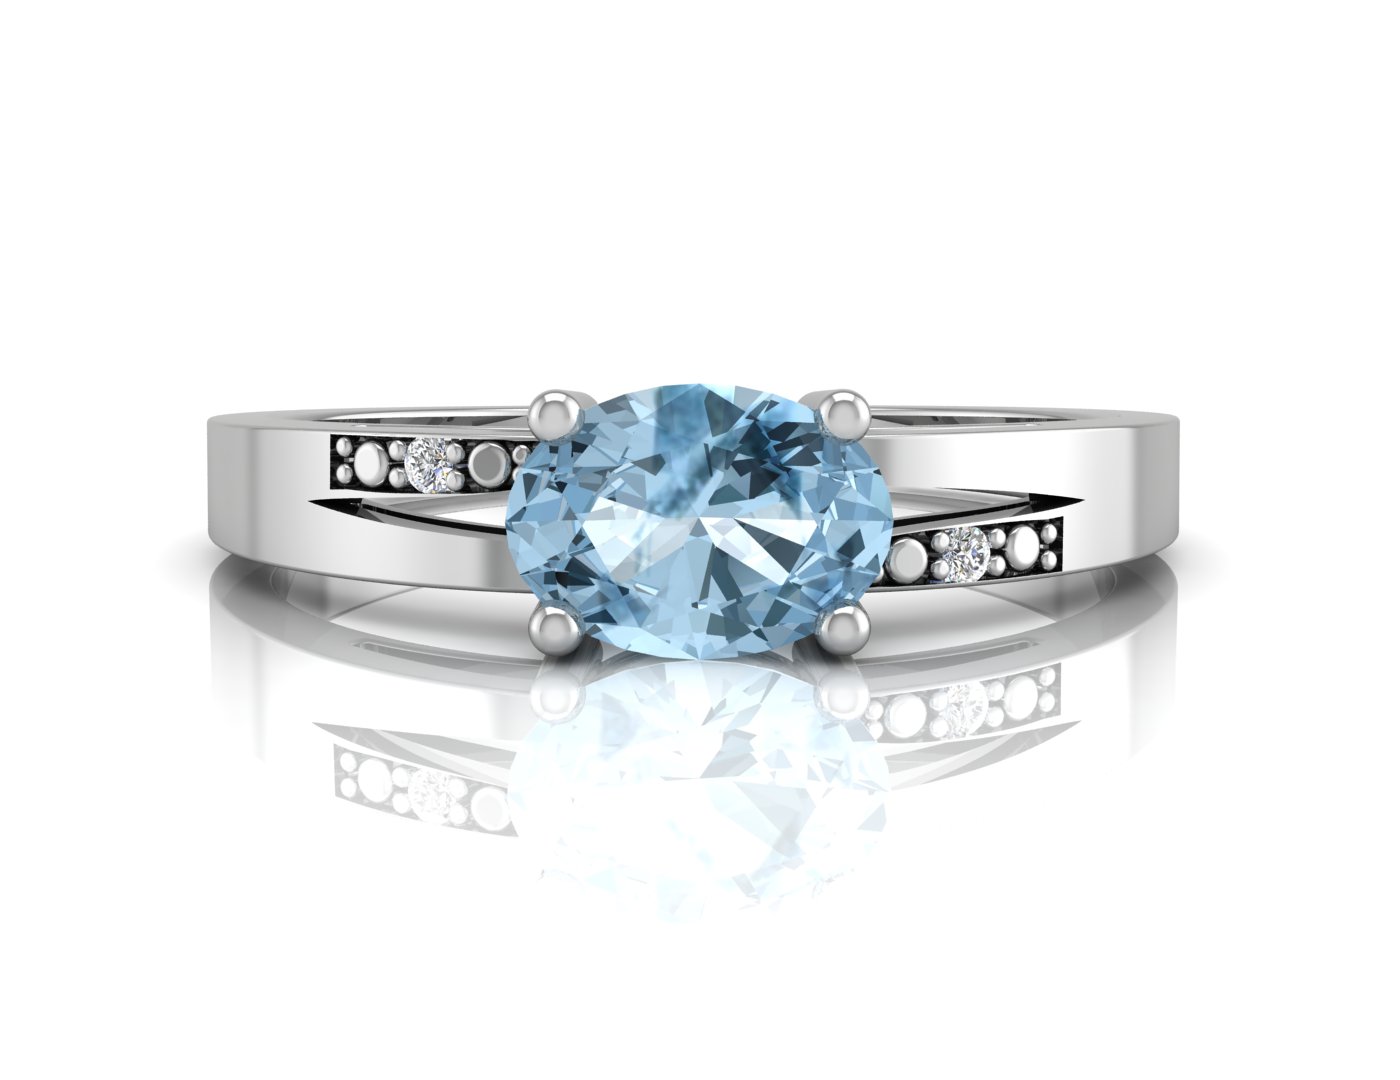 9ct White Gold Diamond And Blue Topaz Ring - Image 4 of 5